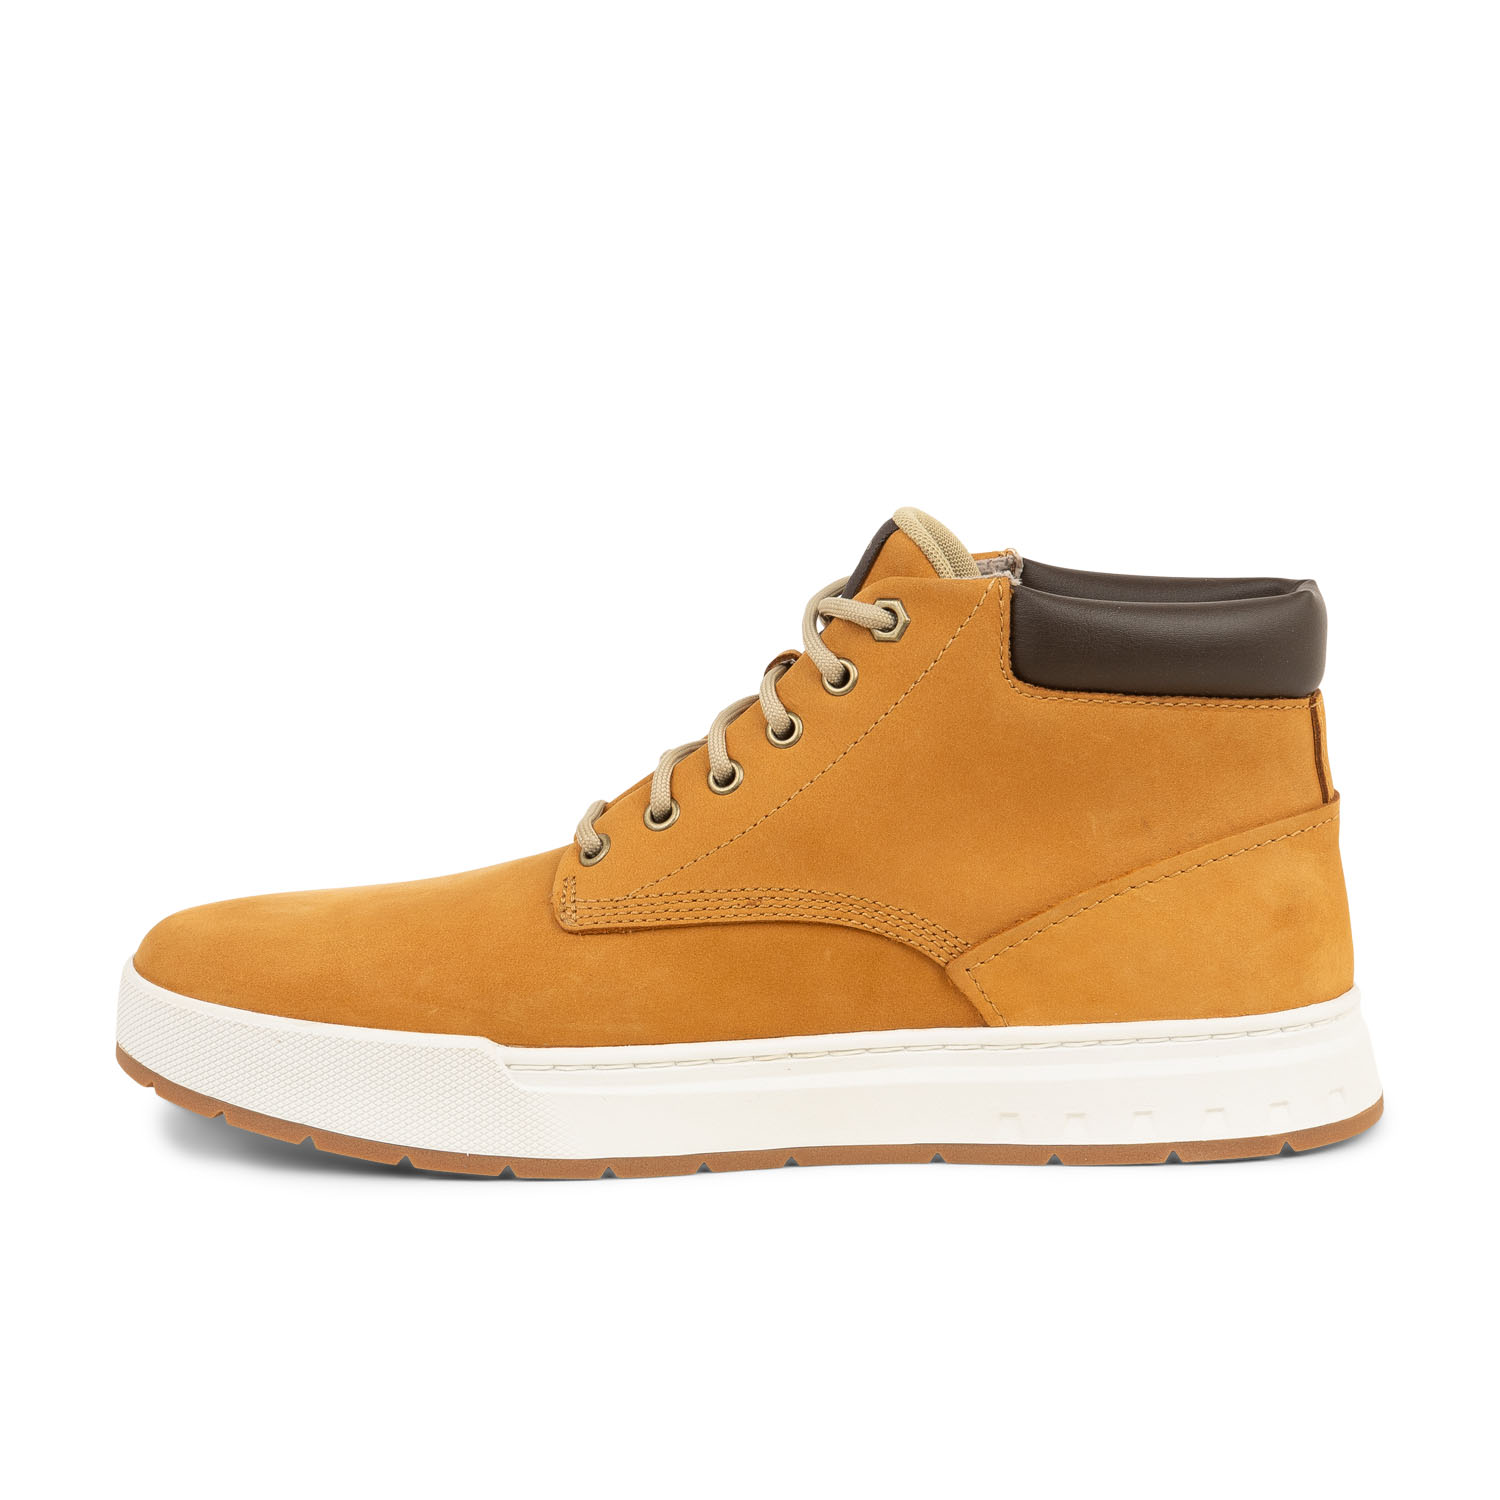 04 - MAPLE GROVE - TIMBERLAND - Chaussures à lacets - Nubuck